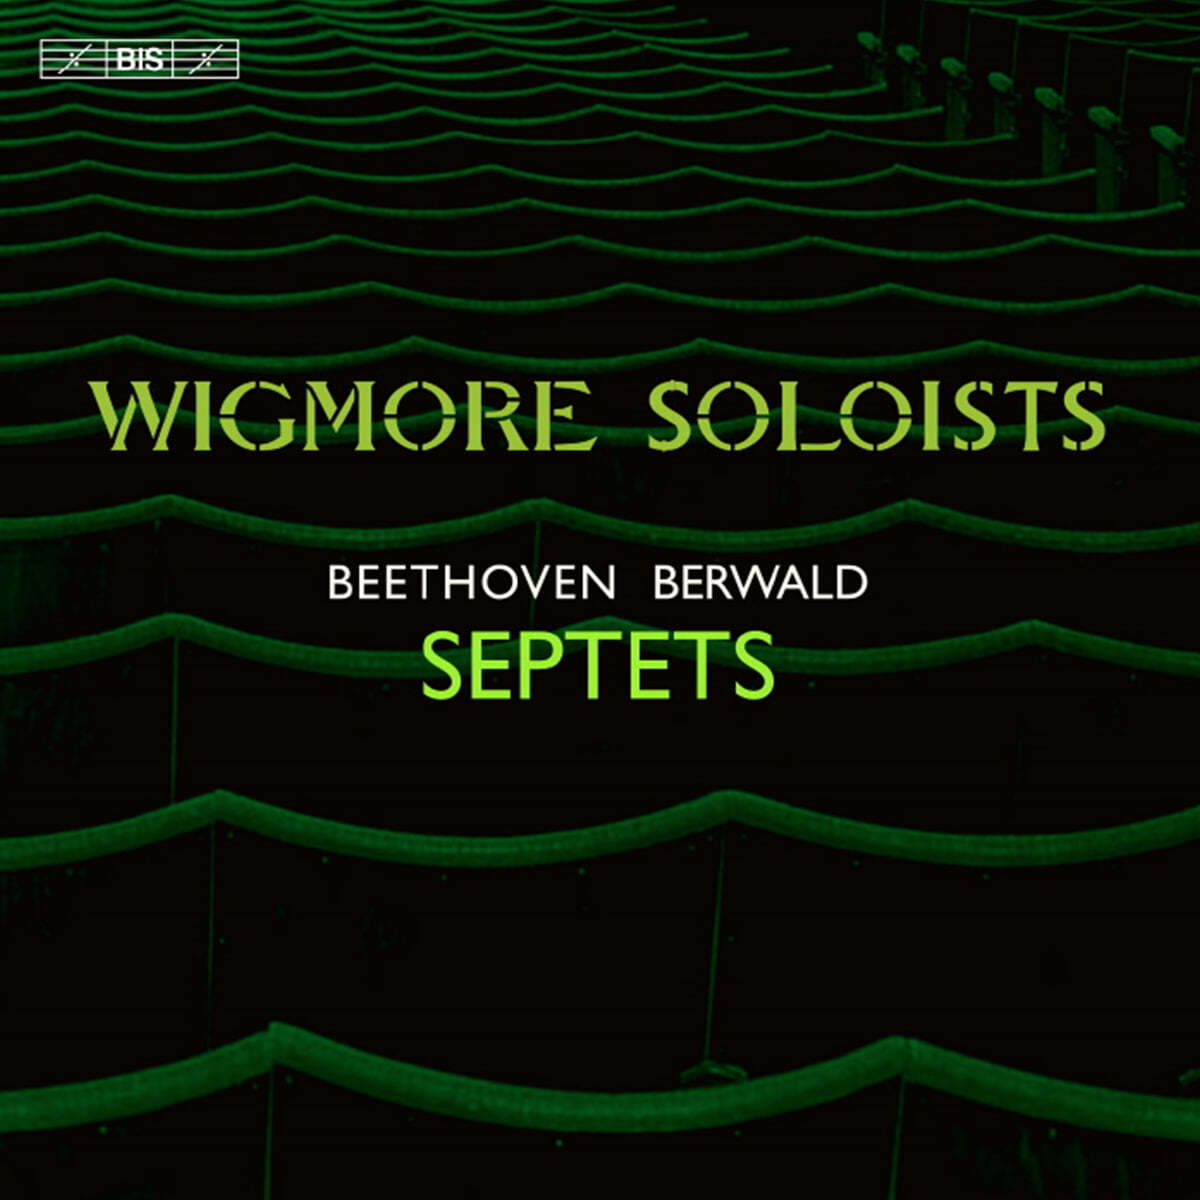 Wigmore Soloists 베토벤 / 베르발드: 7중주 (Beethoven: Septet Op.20 / Berwald: Grand Septet)